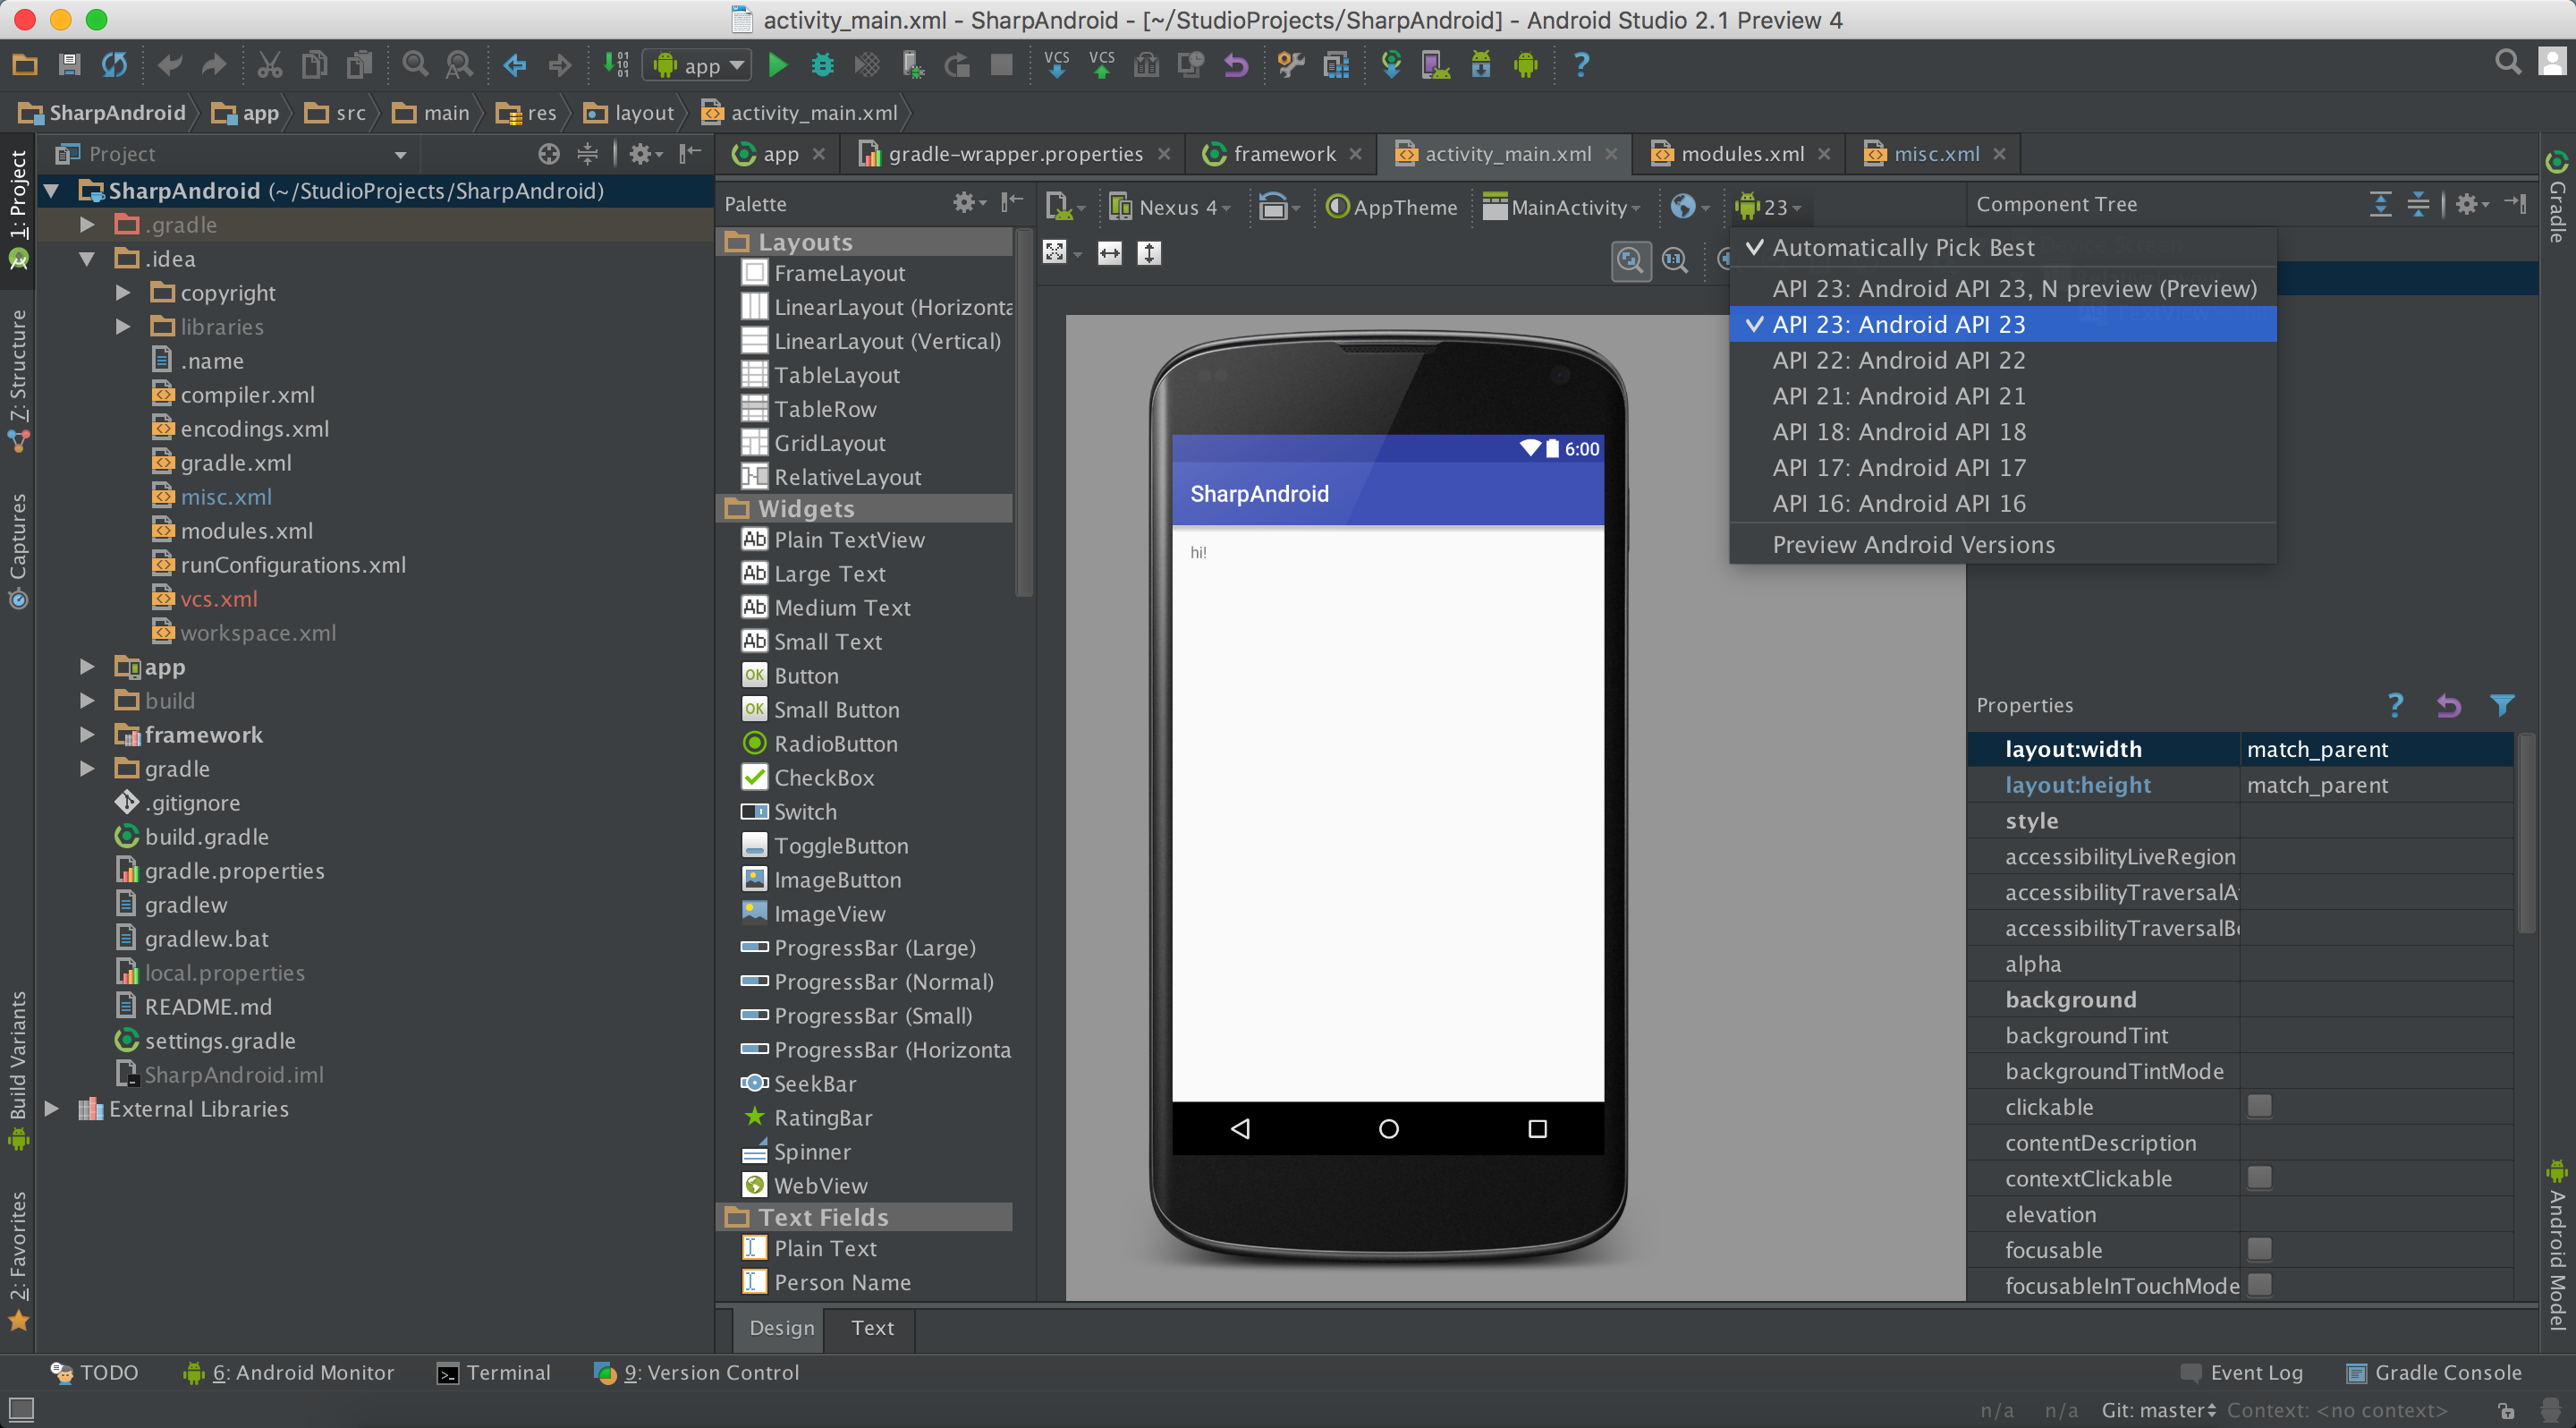 Android N requires the IDE to be running with Java 1.8 or later